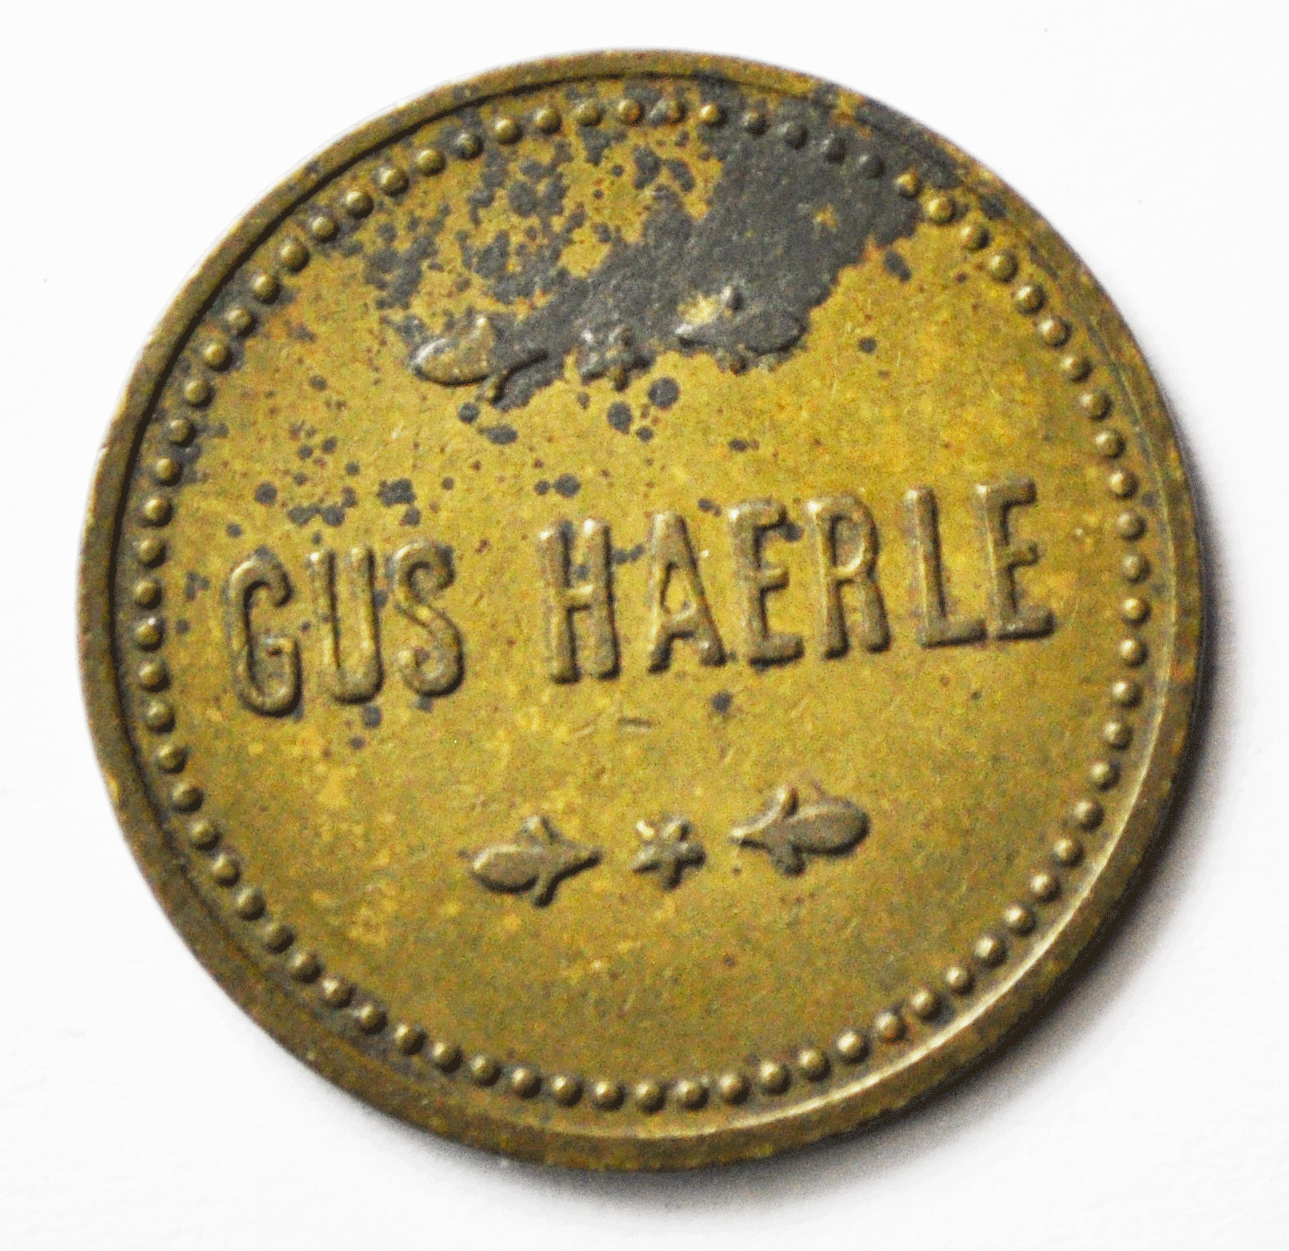 Gus Haerle 2-1/2c Trade Token Rare Two and a Half Cent 21mm Bronze